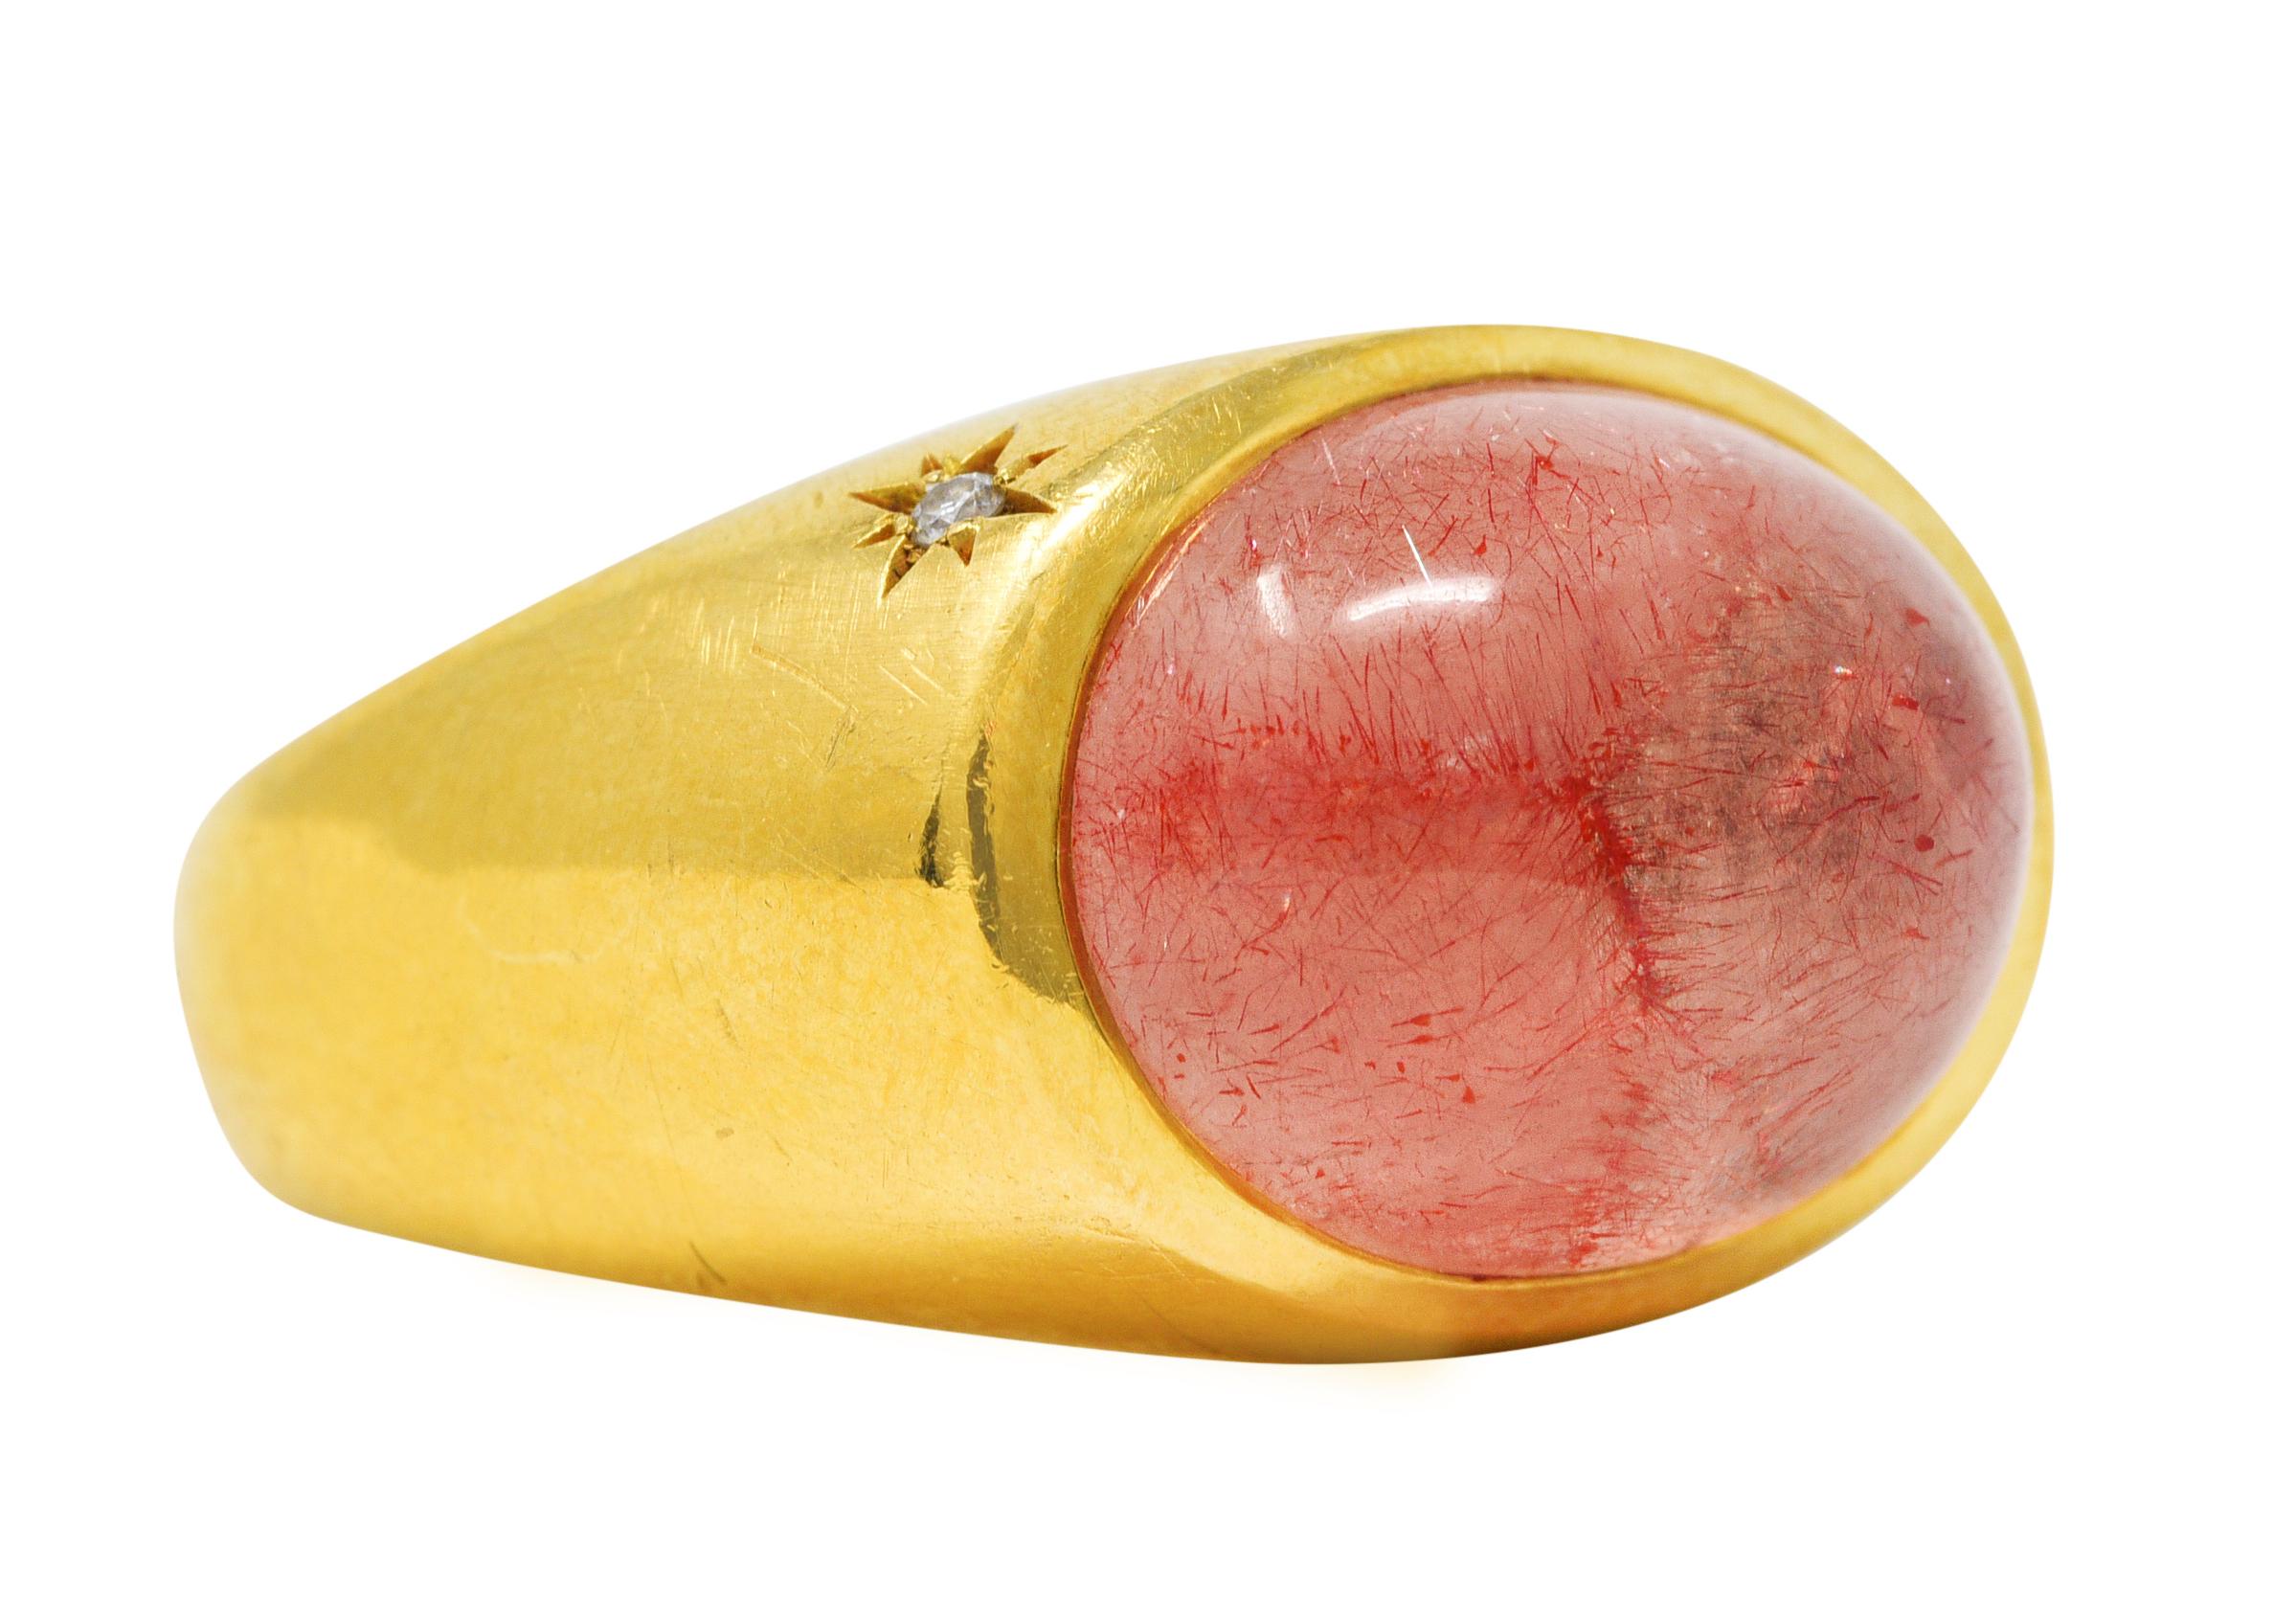 Bombè band ring centers an oval rutilated quartz cabochon - measuring 14.0 x 11.0 mm

Translucent light pink in body color and semi-transparent with rutile inclusions

Rutile exhibits moderate to strong aventurescence

Set East to West in a polished